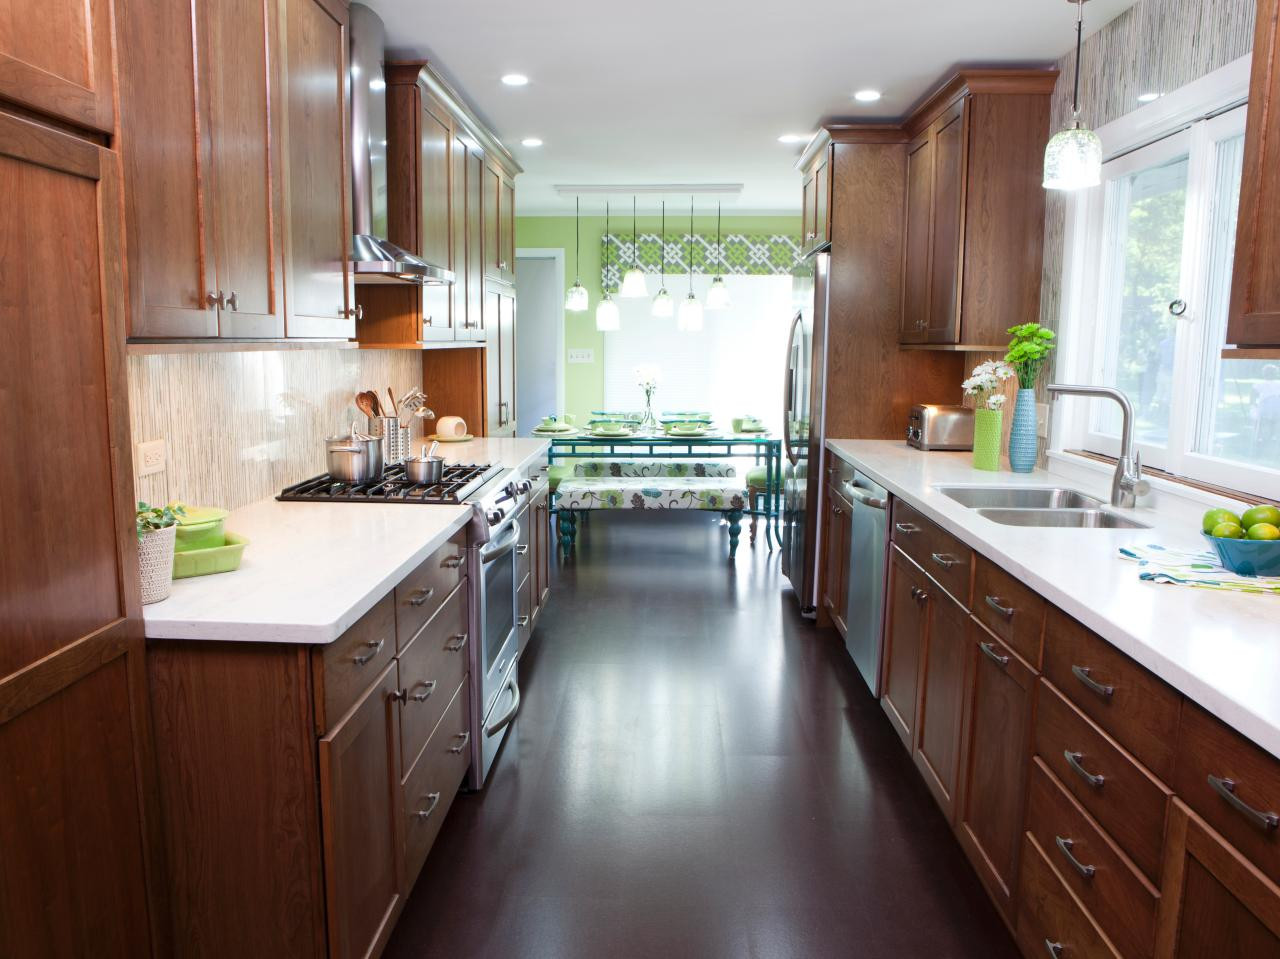 Small Galley Kitchen Ideas
 Galley Kitchen Ideas Steps to Plan to Set up Galley